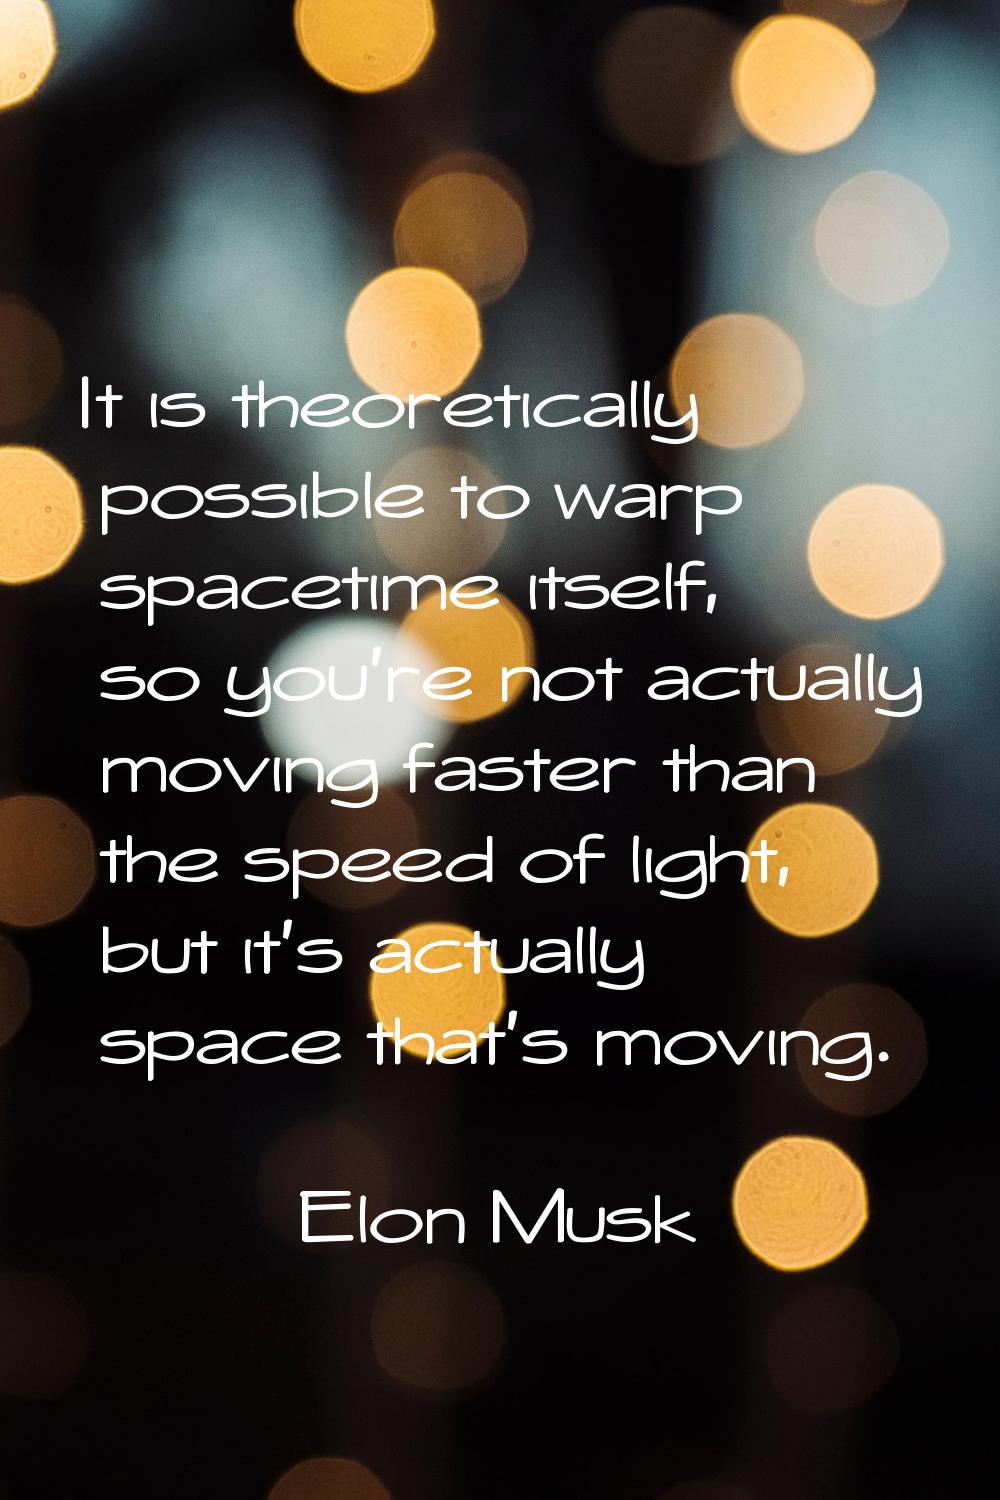 It is theoretically possible to warp spacetime itself, so you're not actually moving faster than th